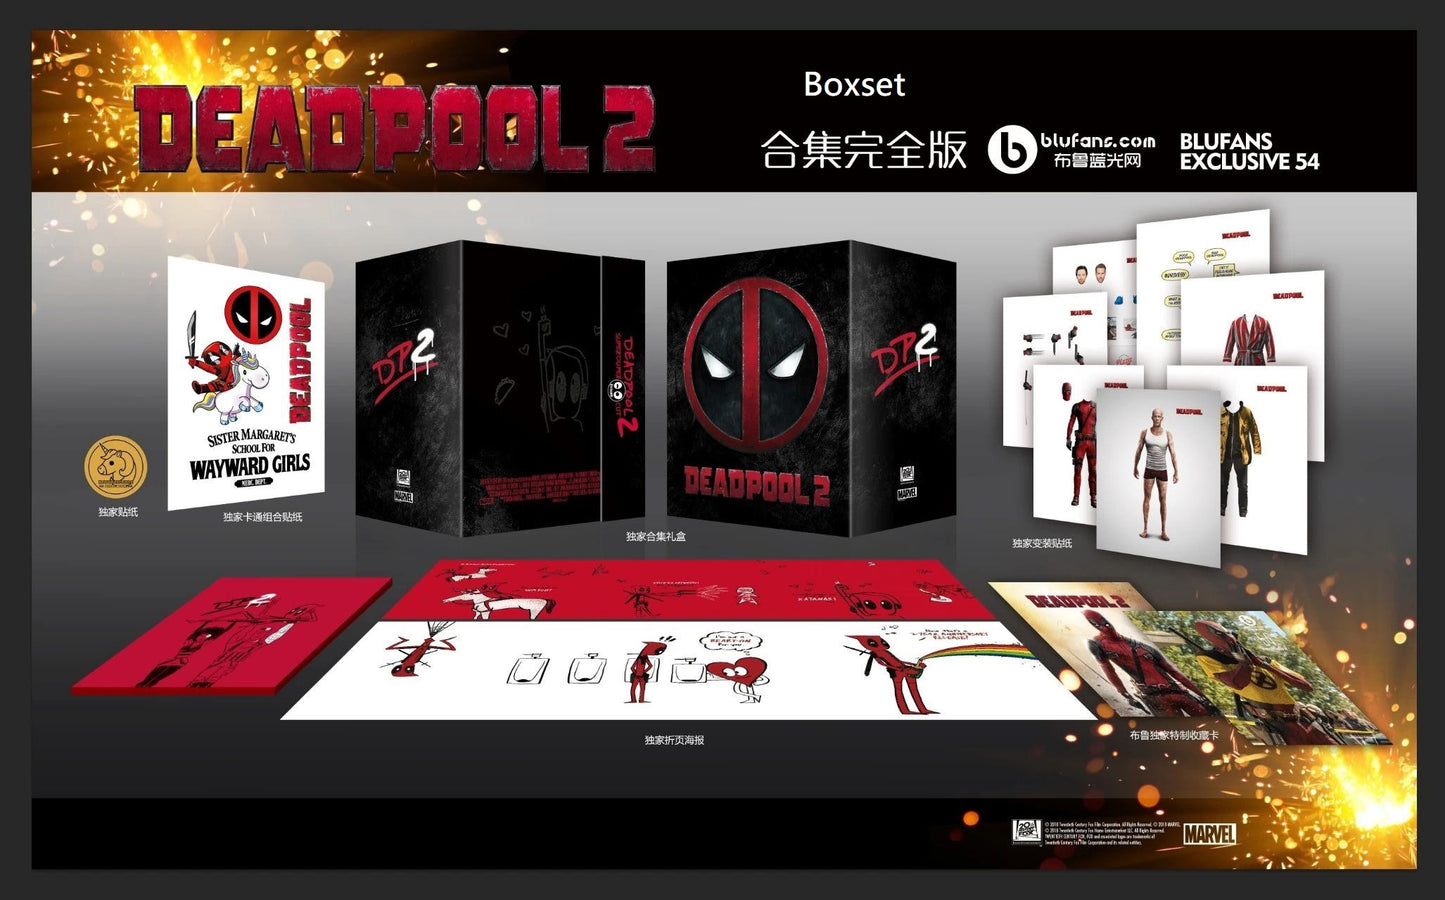 Deadpool 2: Once Upon a Deadpool (4K UHD+2D Blu-ray SteelBook) (Blufans Exclusive #54) ONE CLICK BOX SET